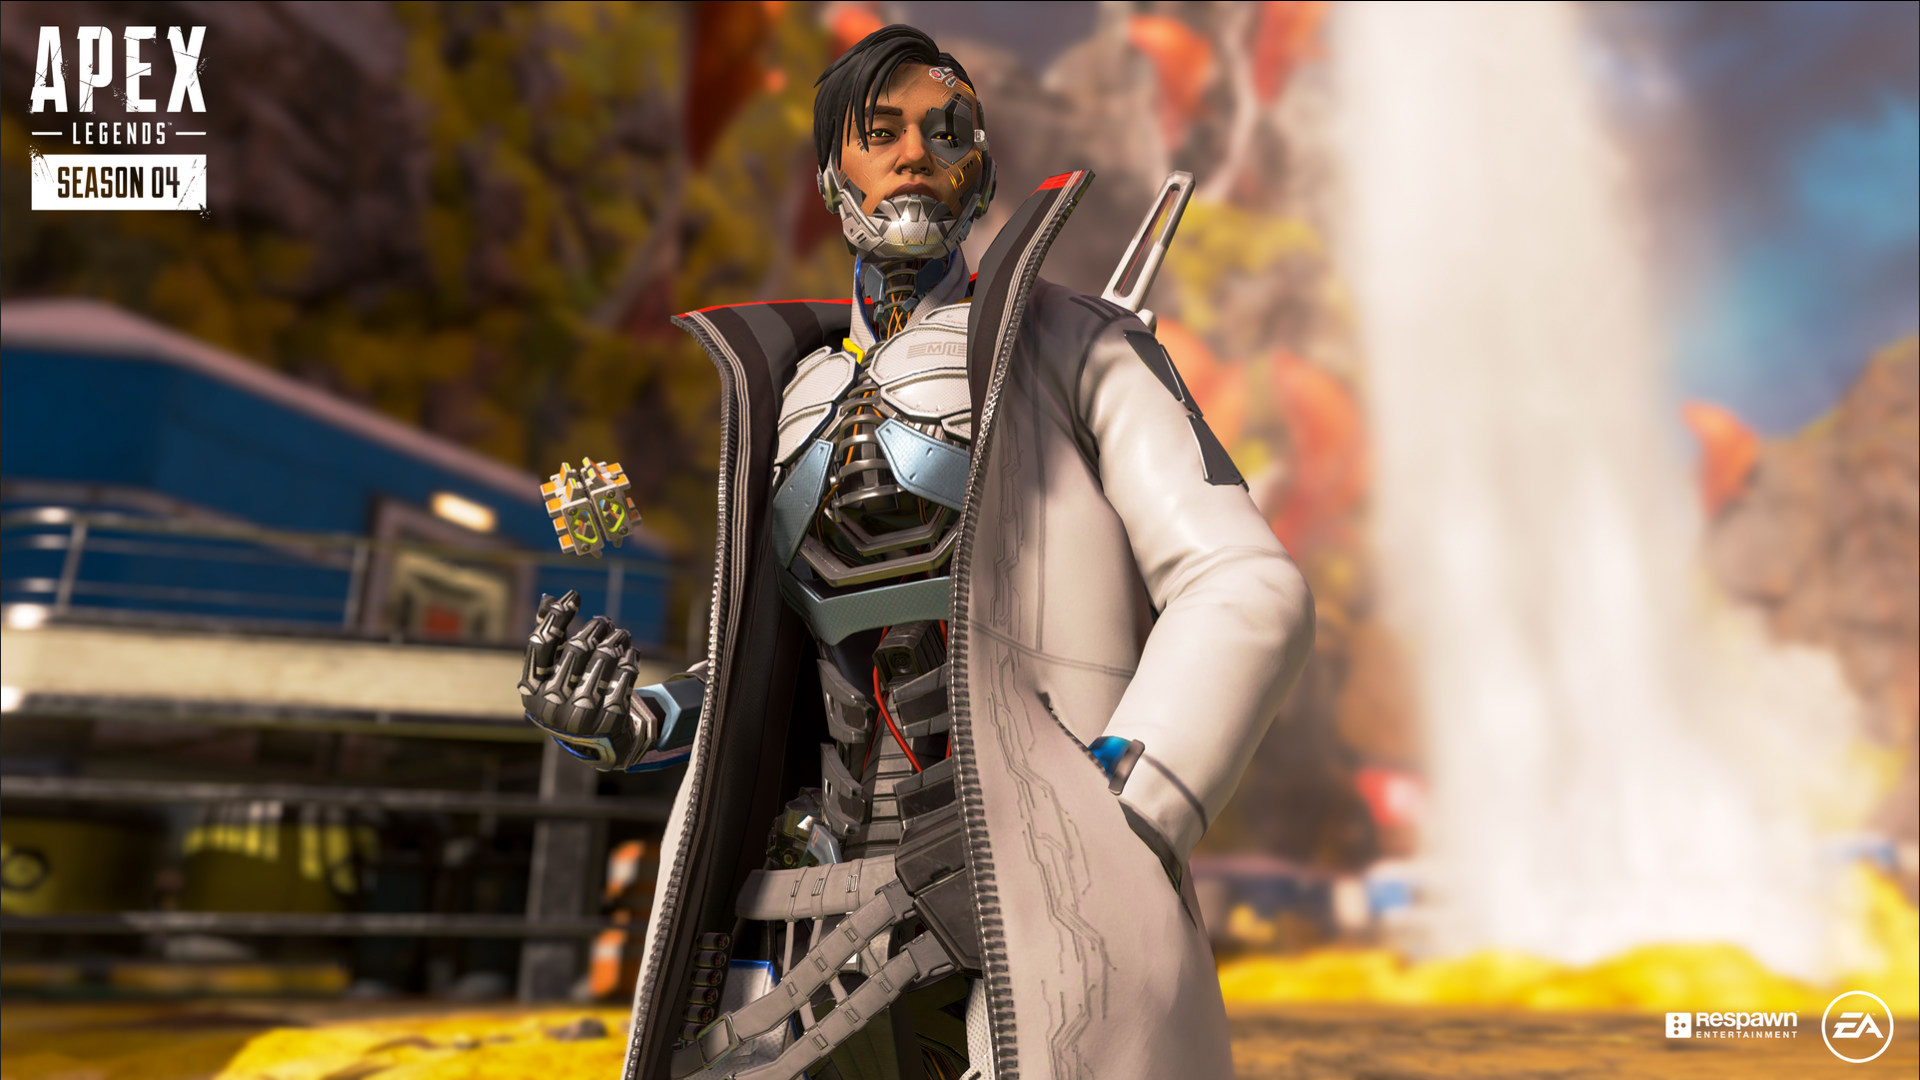 Apex Legends' season 5 will reportedly be called “Fortune's Favor